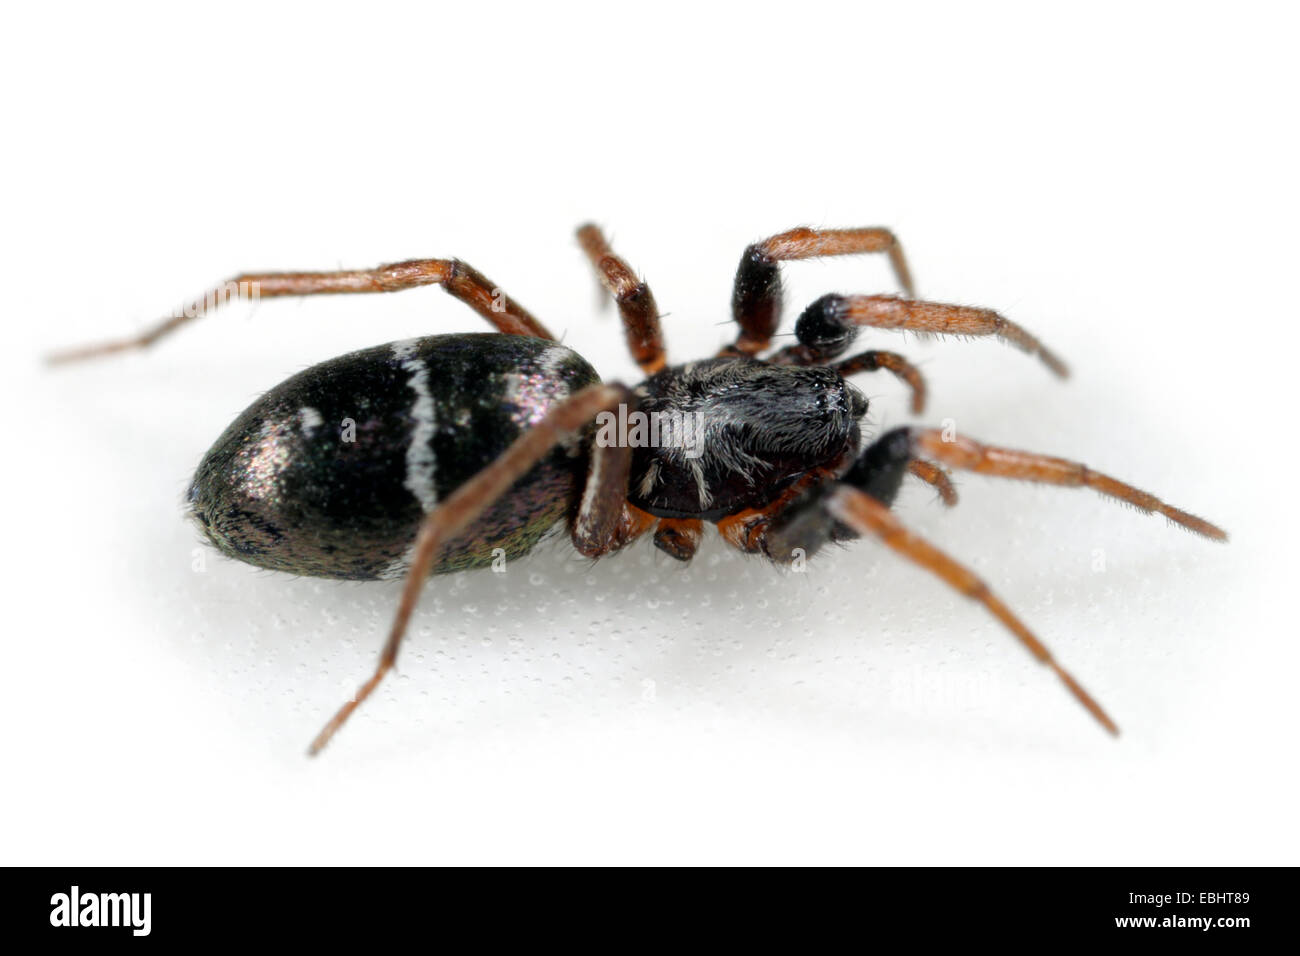 A female Ground spider (Micaria pulicaria), head-on view on white background. Ground spiders are part of the family Gnaphosidae. Stock Photo